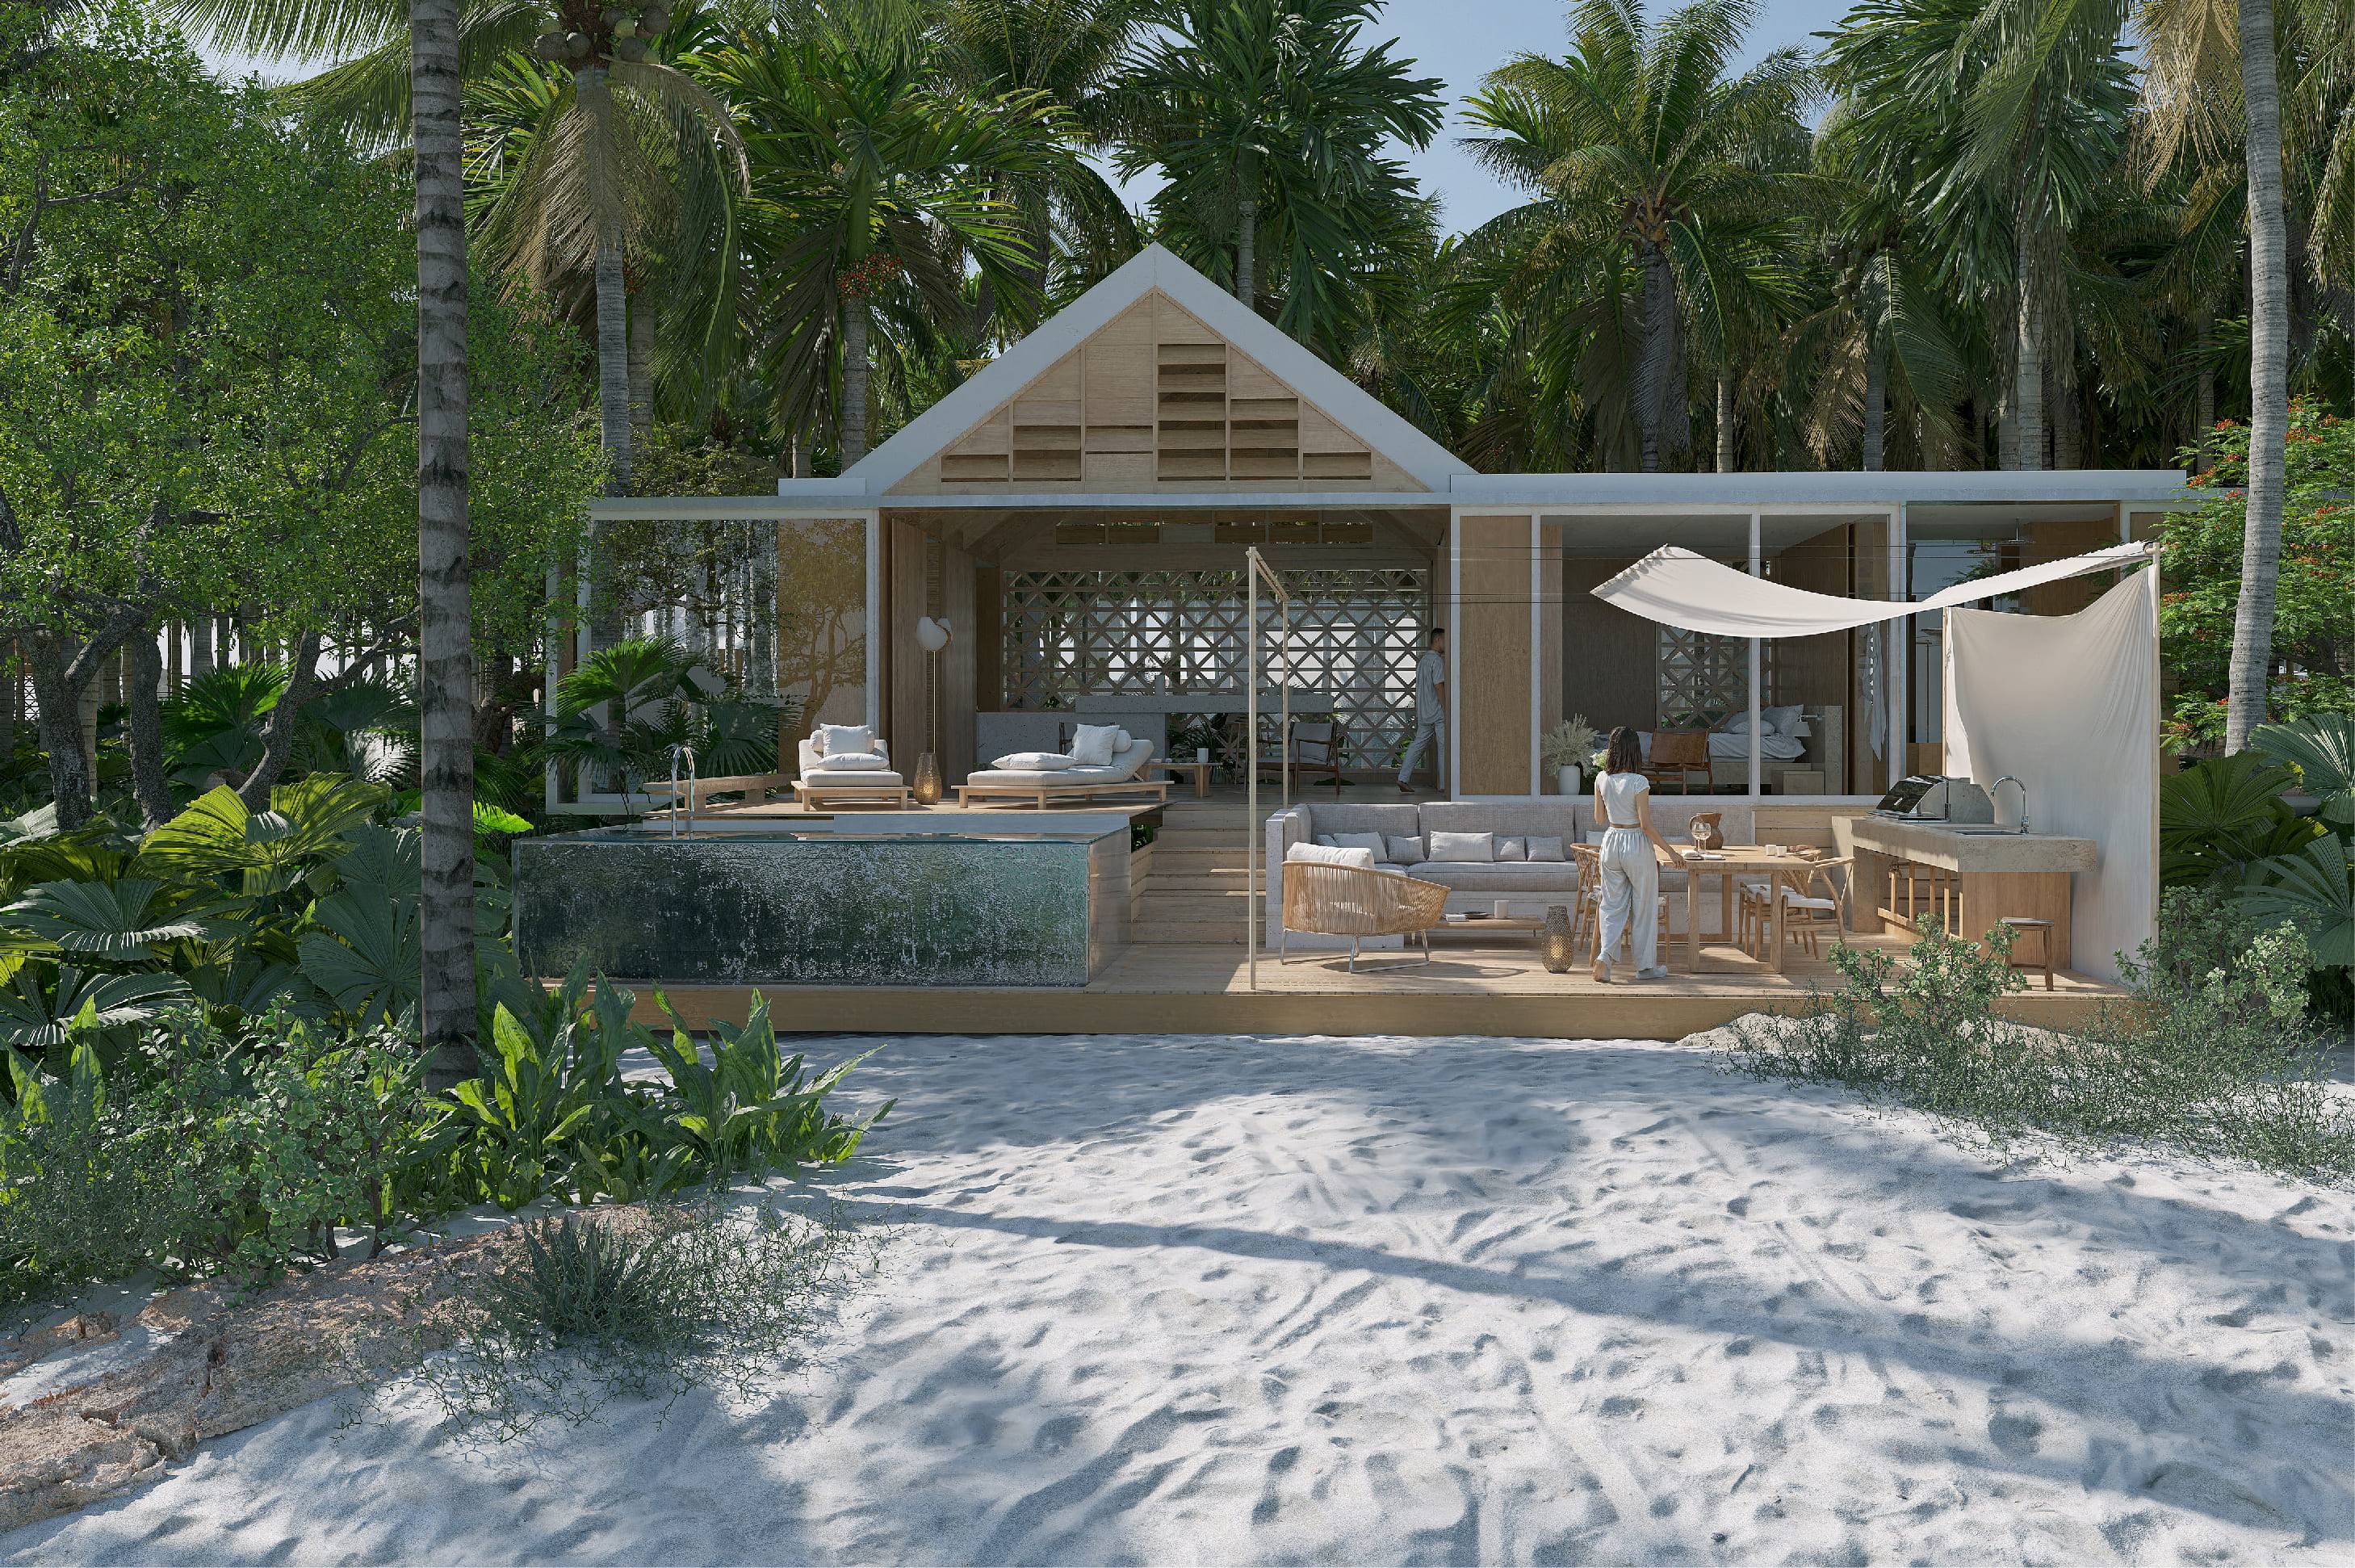 DELUXE TWO BEDROOM VILLA at the first Ultra Premium Residence Resort in the Maldives Malé Atoll